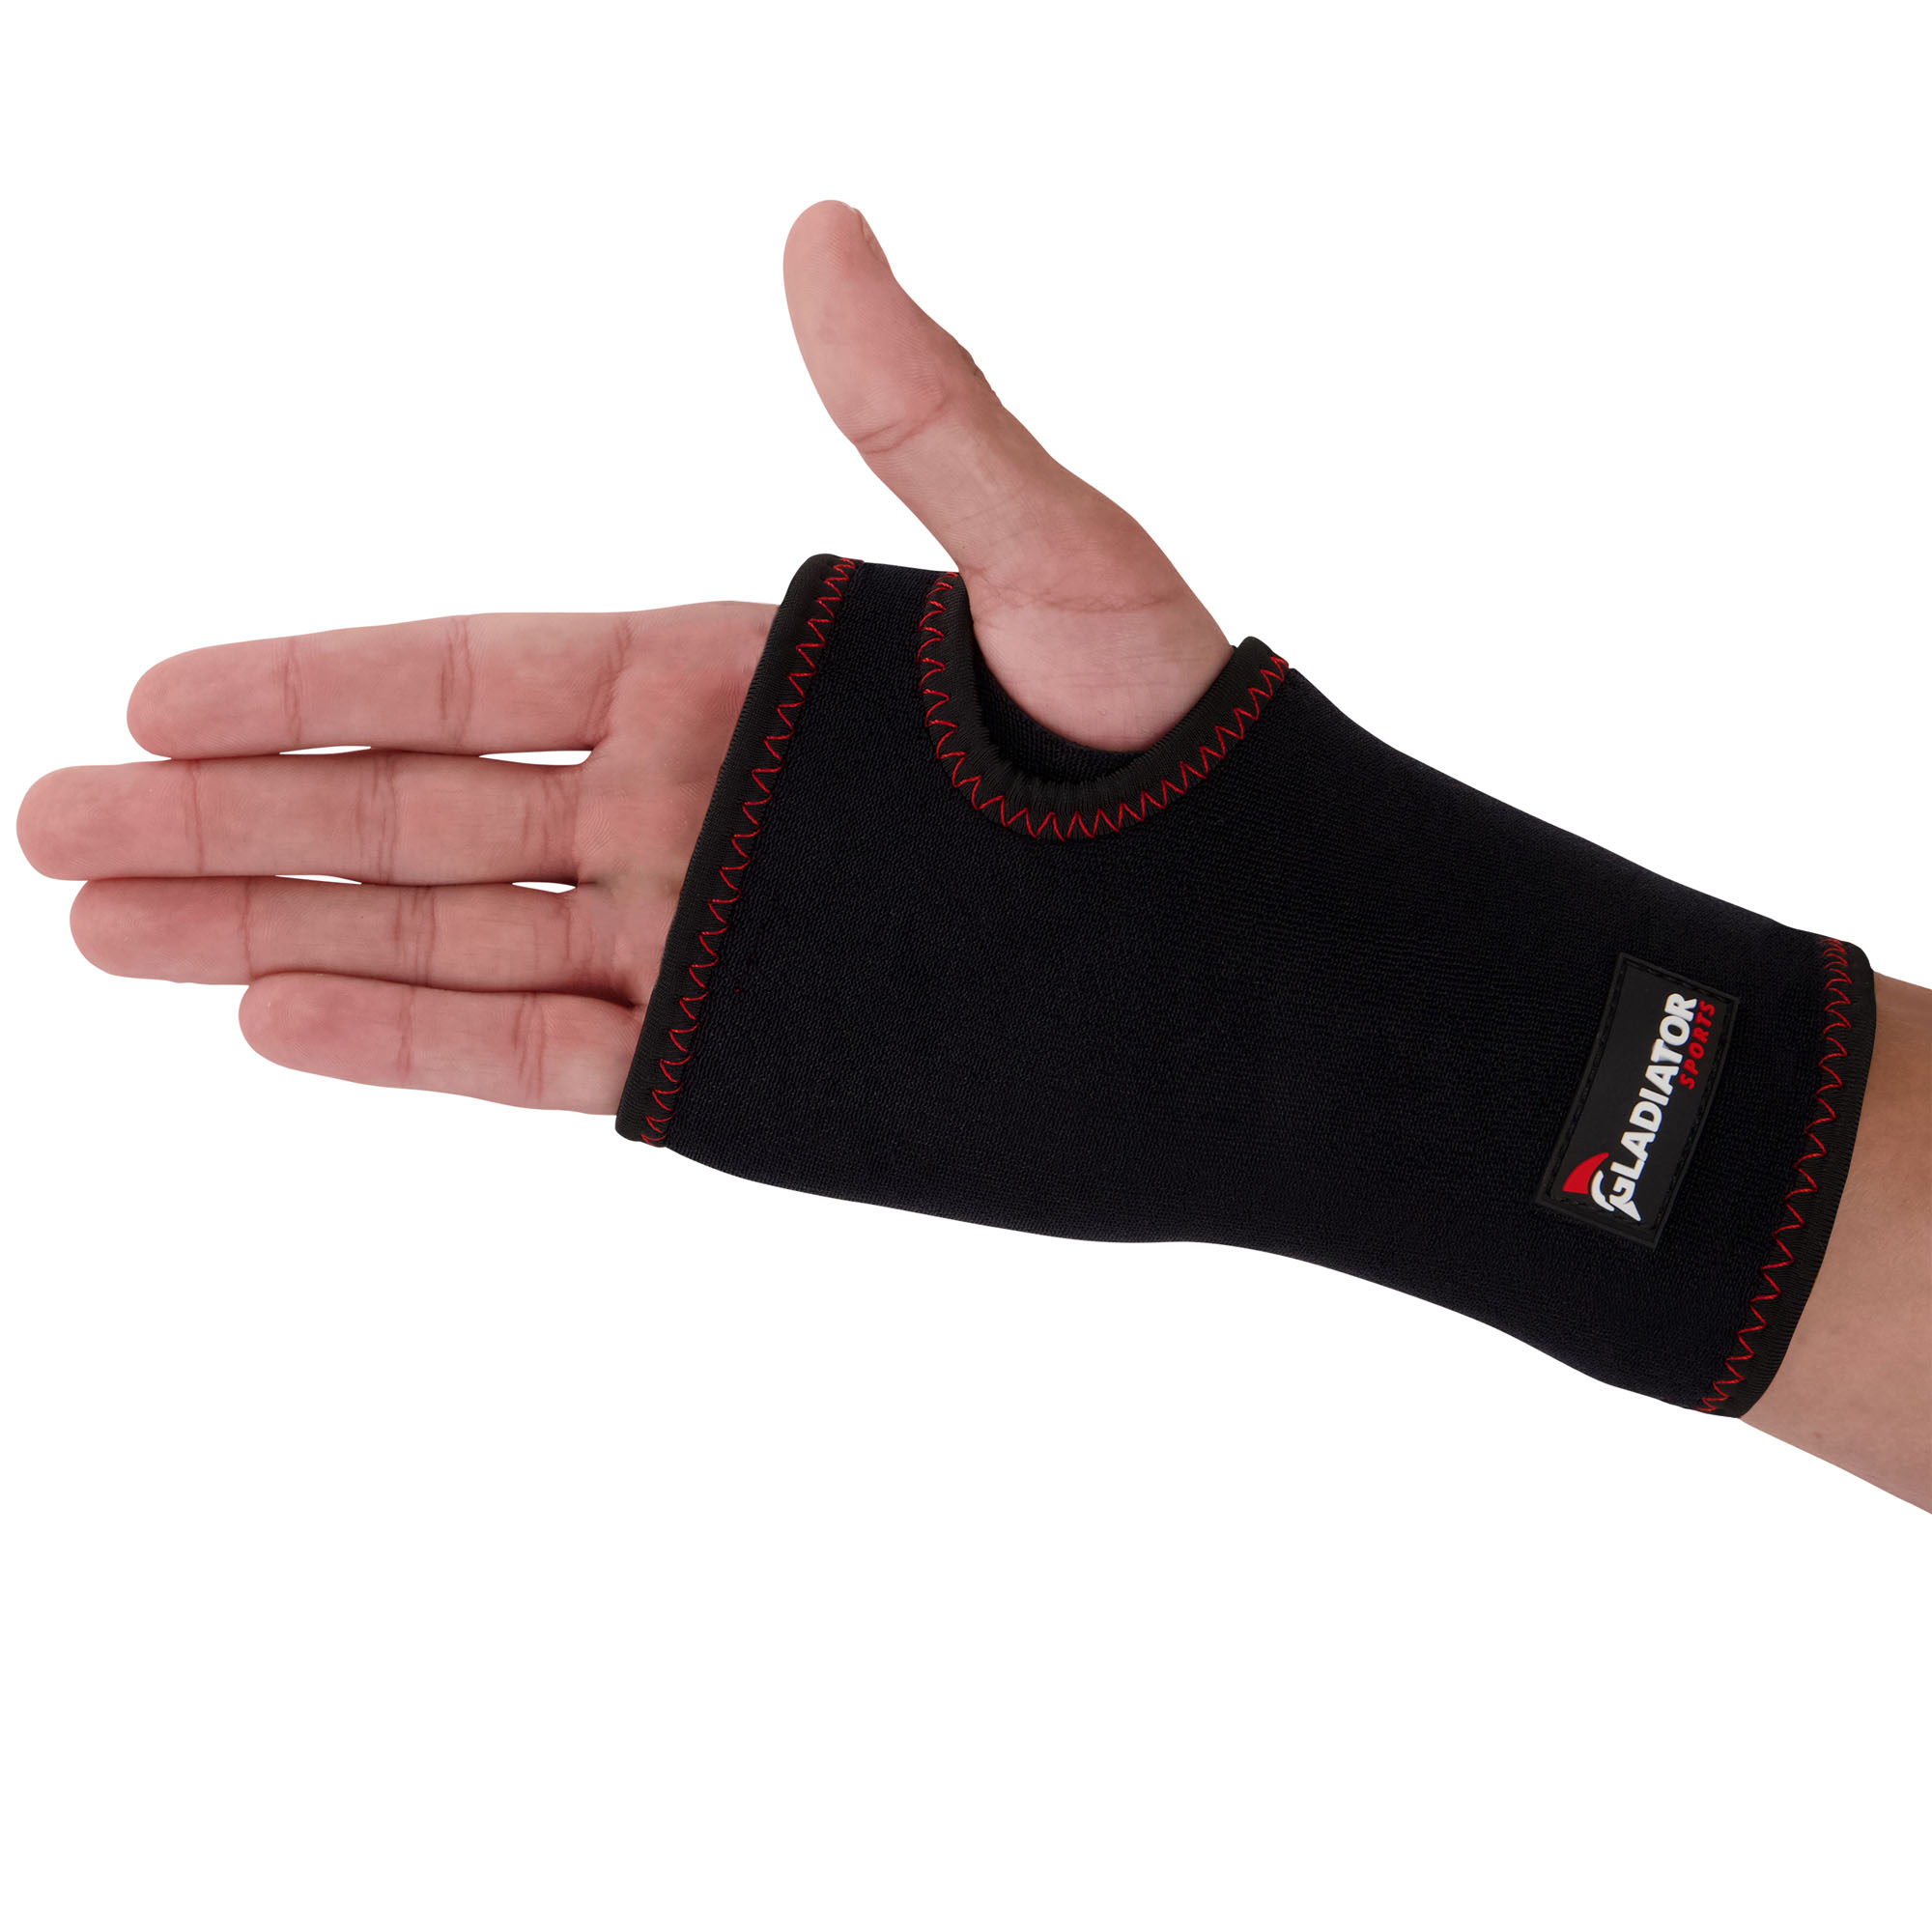 gladiator sports carpal tunnel syndrome wrist support wrapped